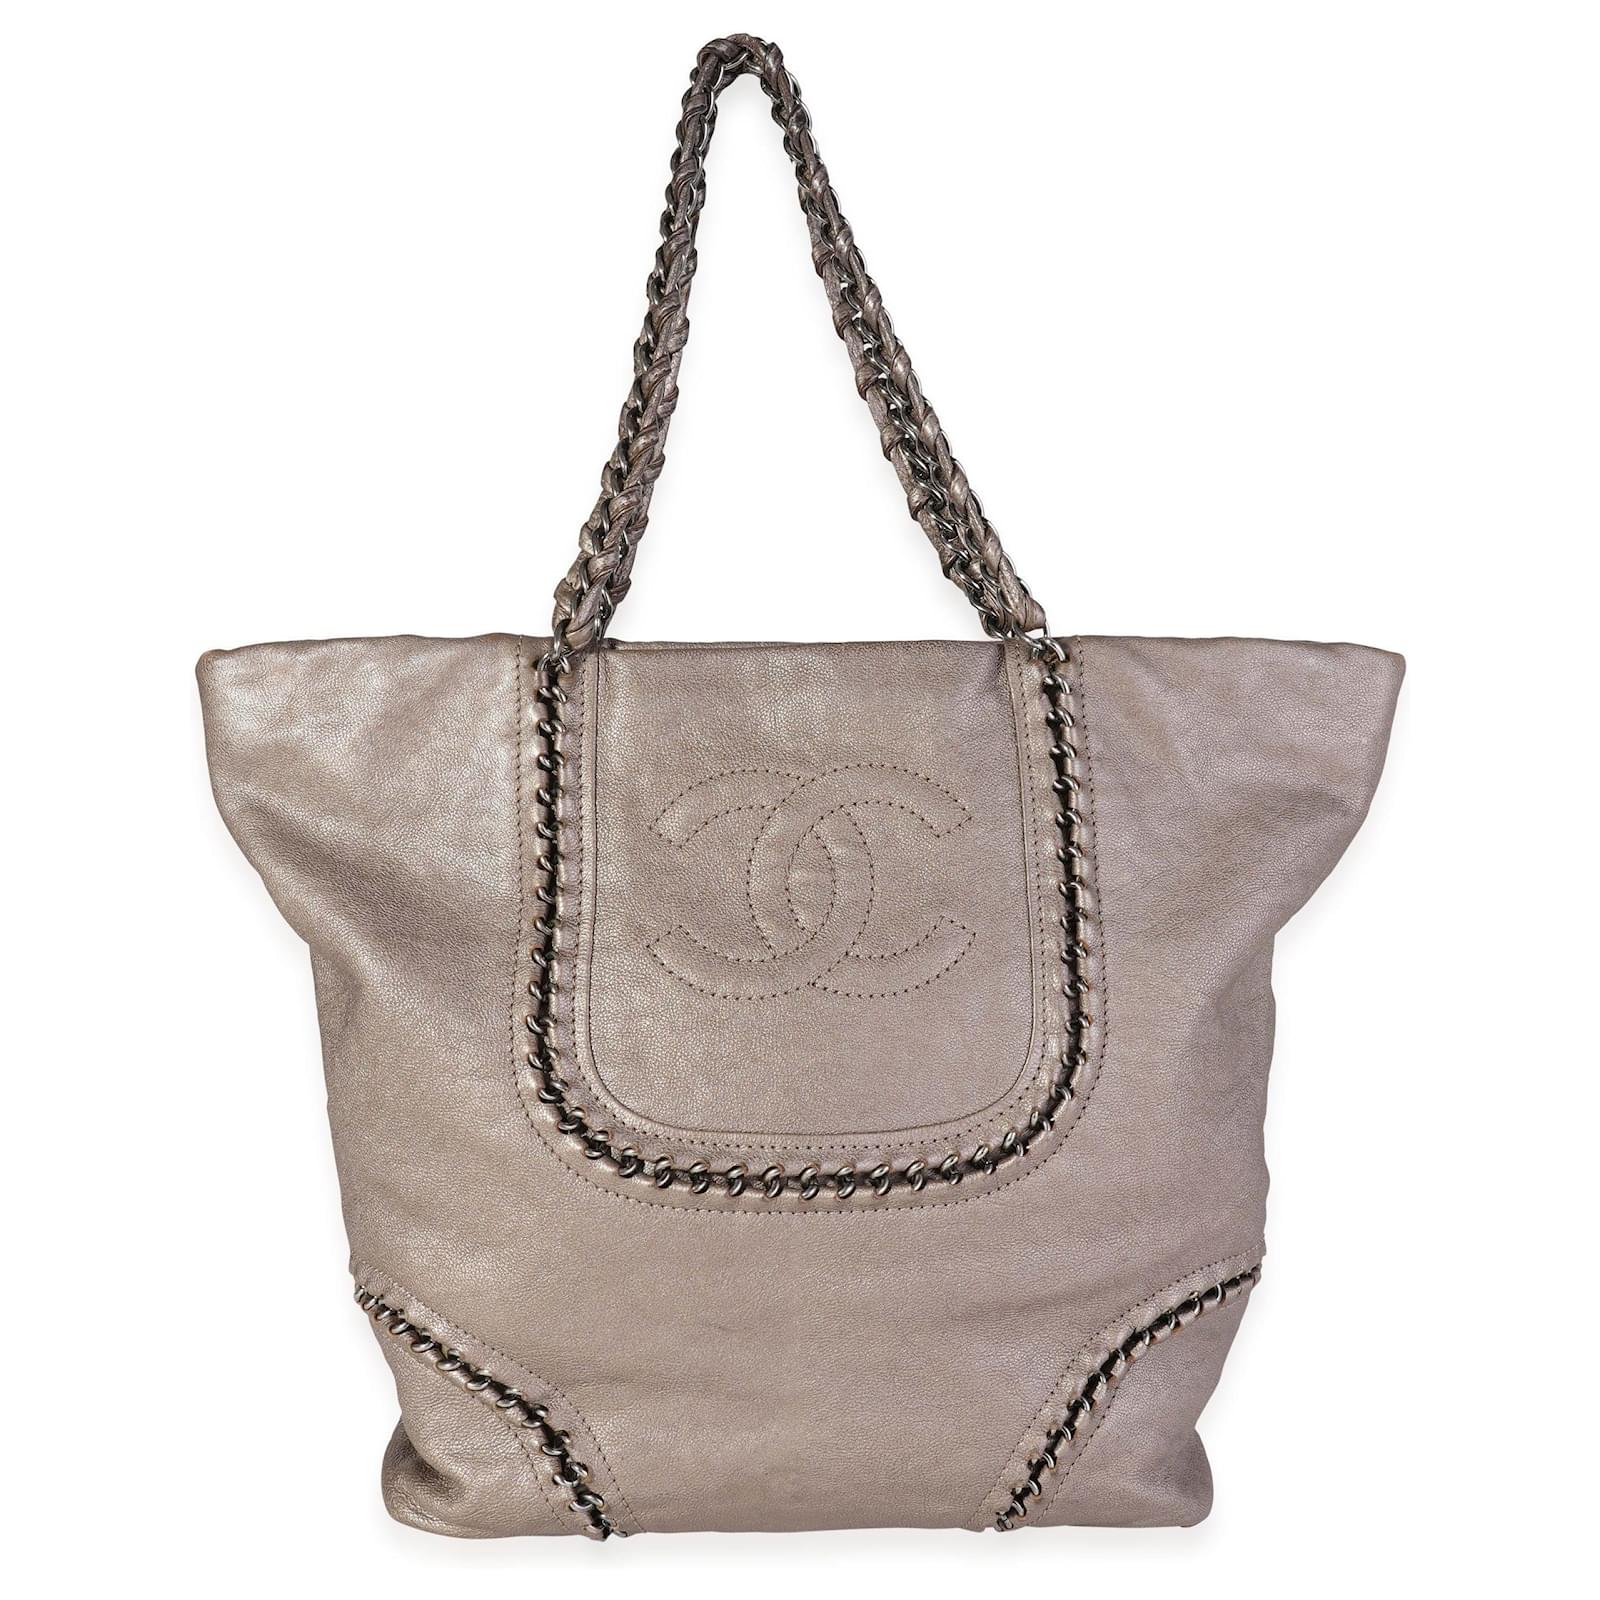 CHANEL, Bags, Chanel Luxe Ligne Tote